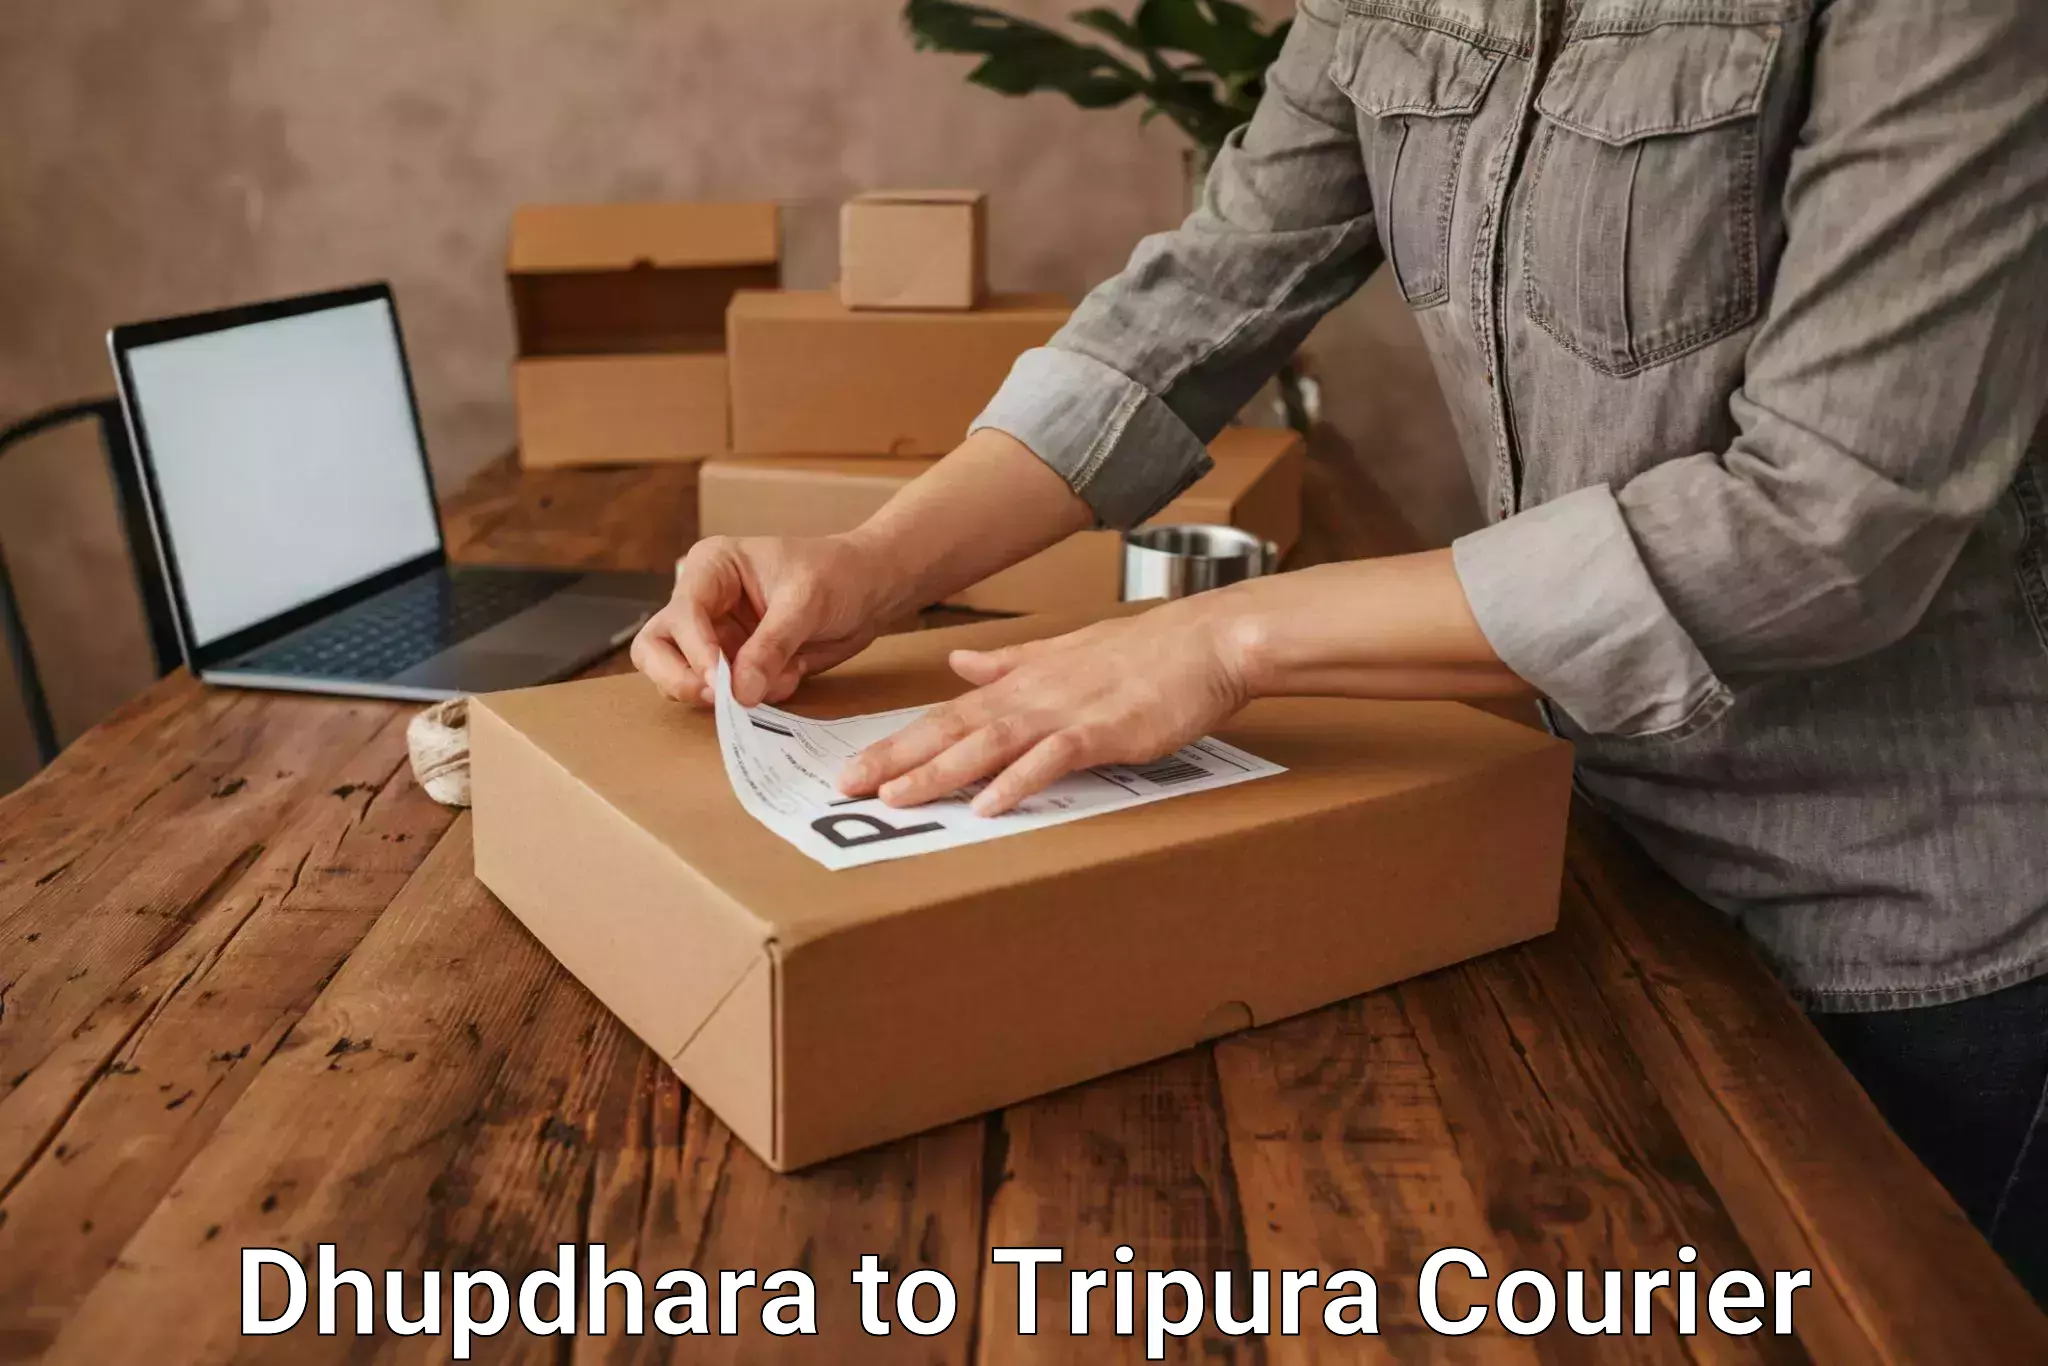 24-hour delivery options Dhupdhara to Udaipur Tripura